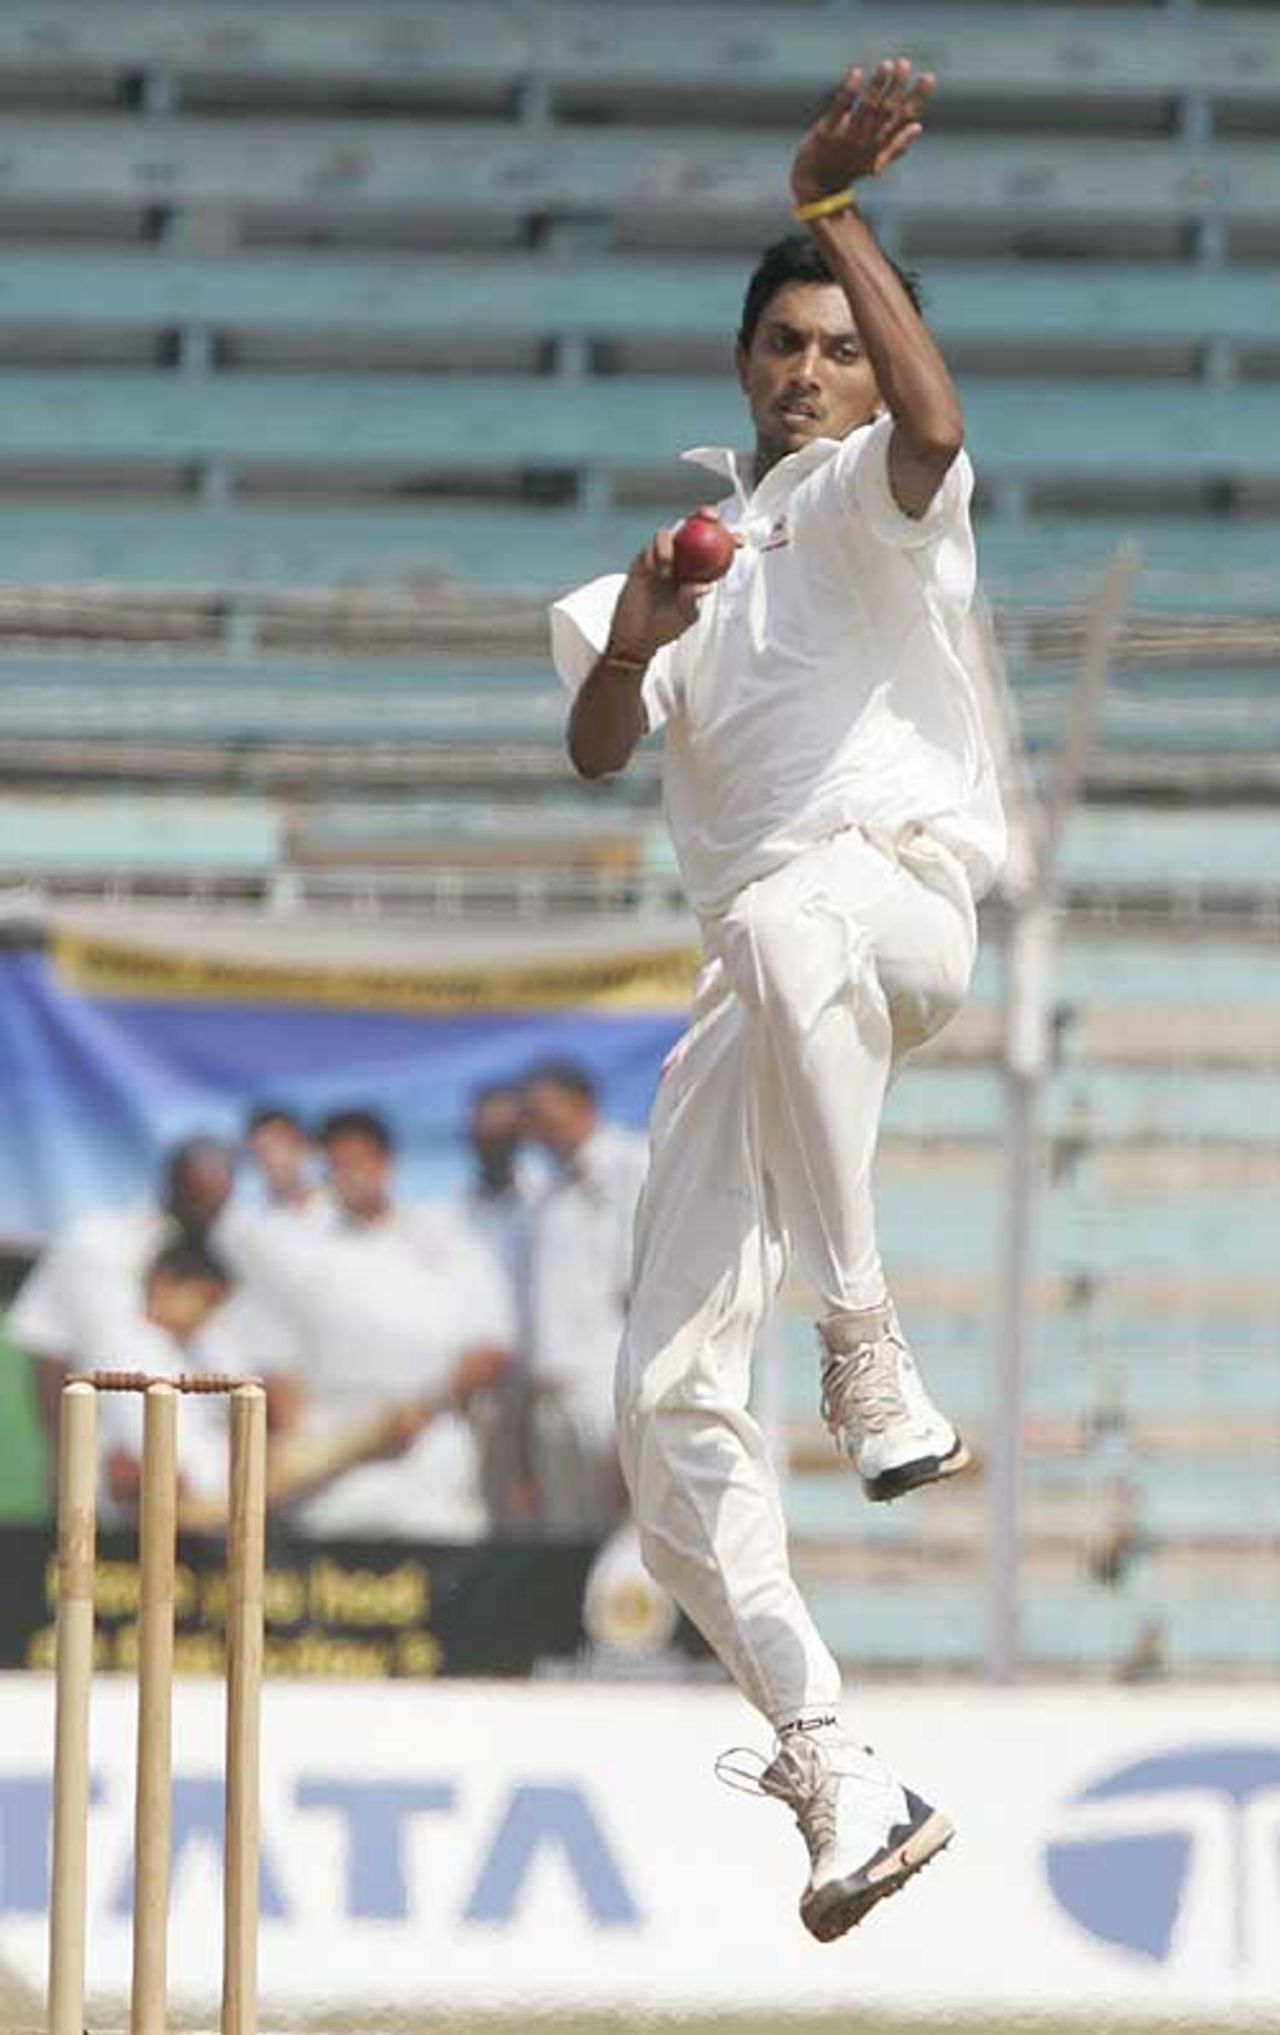 Siddharth Trivedi took 6 for 67 against North Zone, North Zone v West Zone, Duleep Trophy final, 2nd day, Mumbai, February 20, 2008